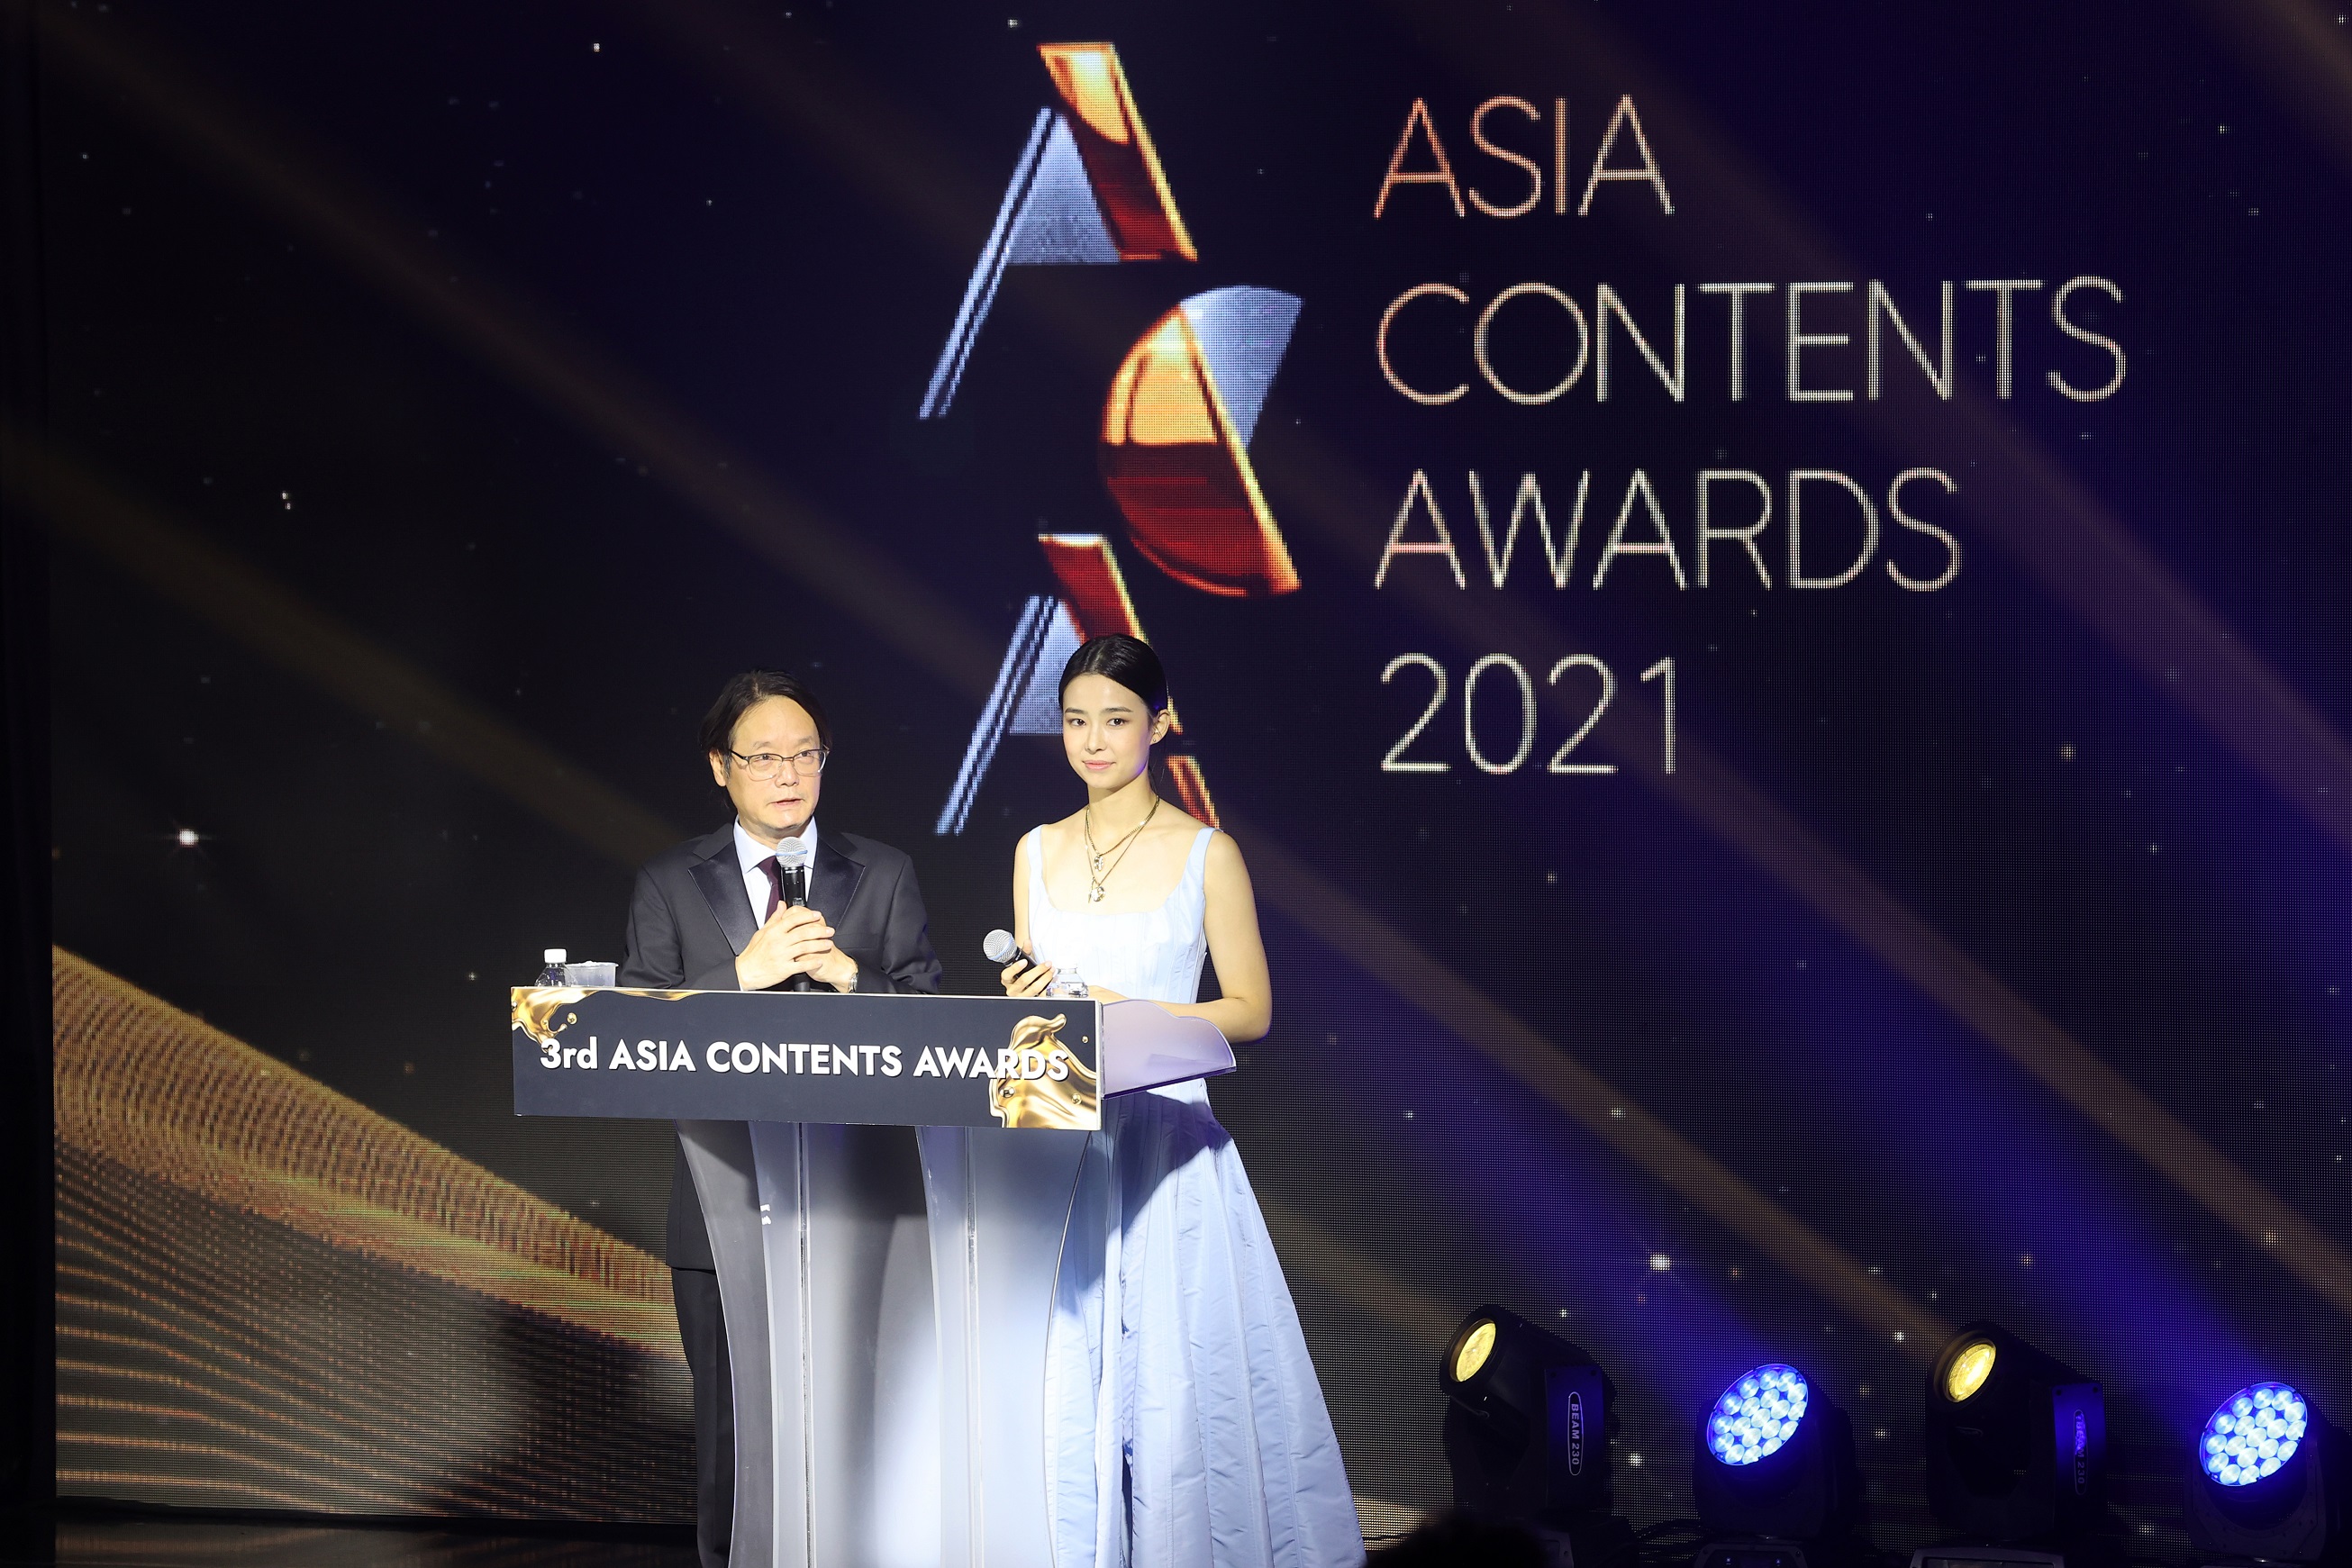 Asia Contents Awards 2021